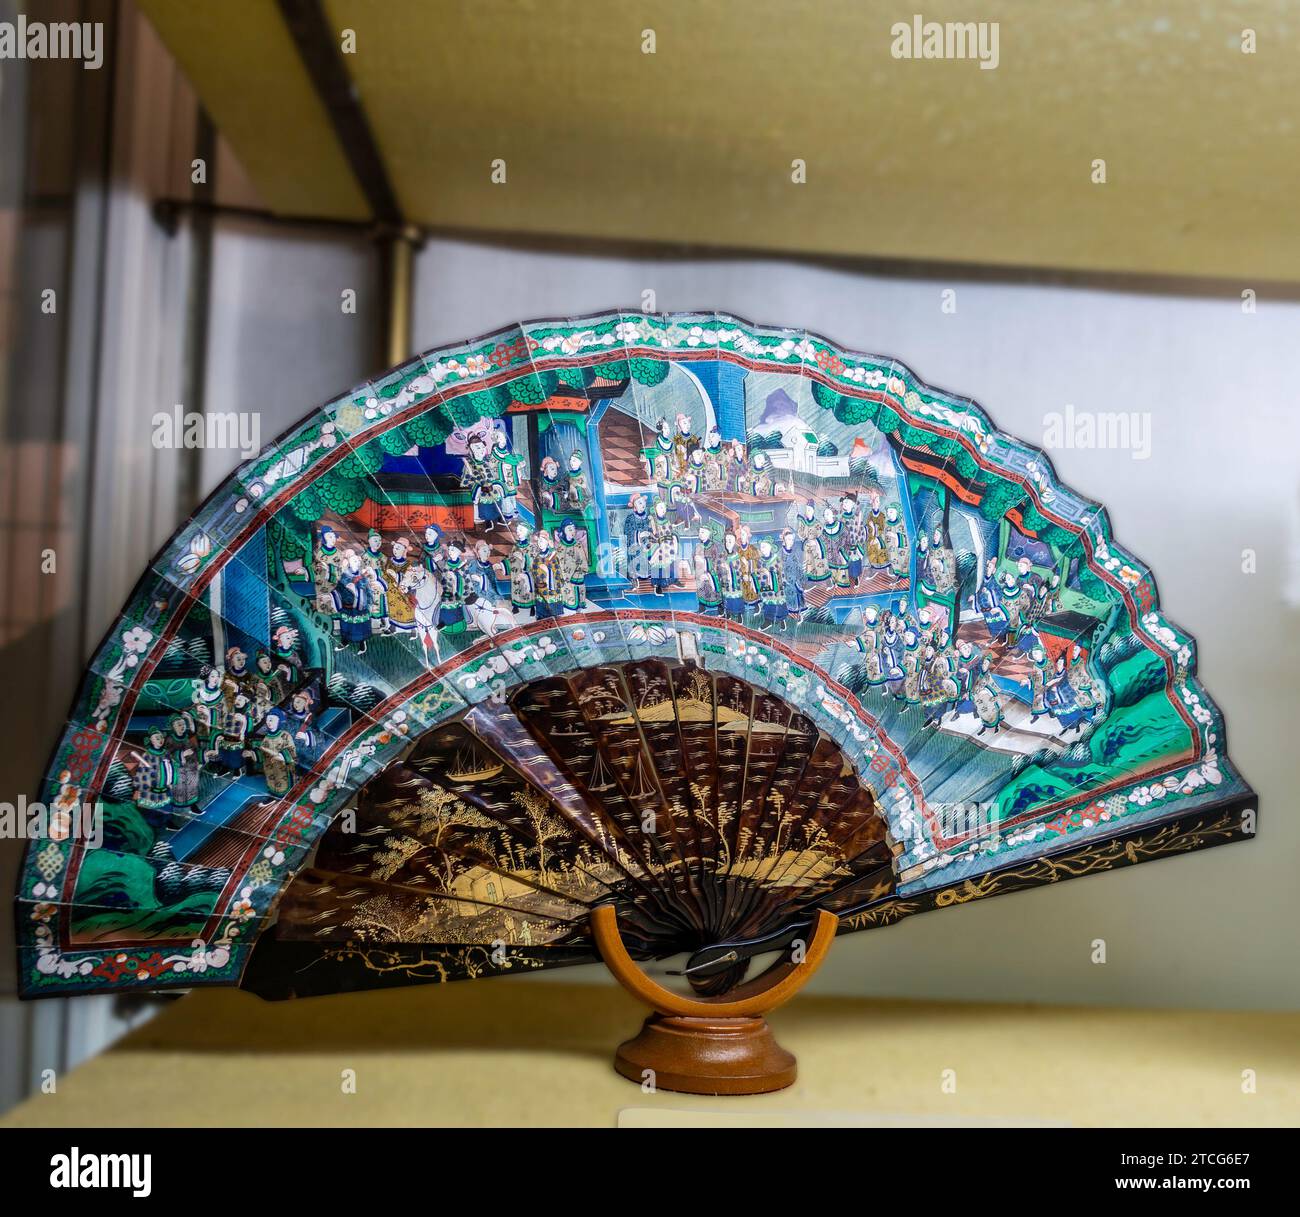 Colourful hand fan with detailed Asian artwork on stand displayed in the Alcázar of Seville, The Royal Palace of Seville, Spain. Stock Photo